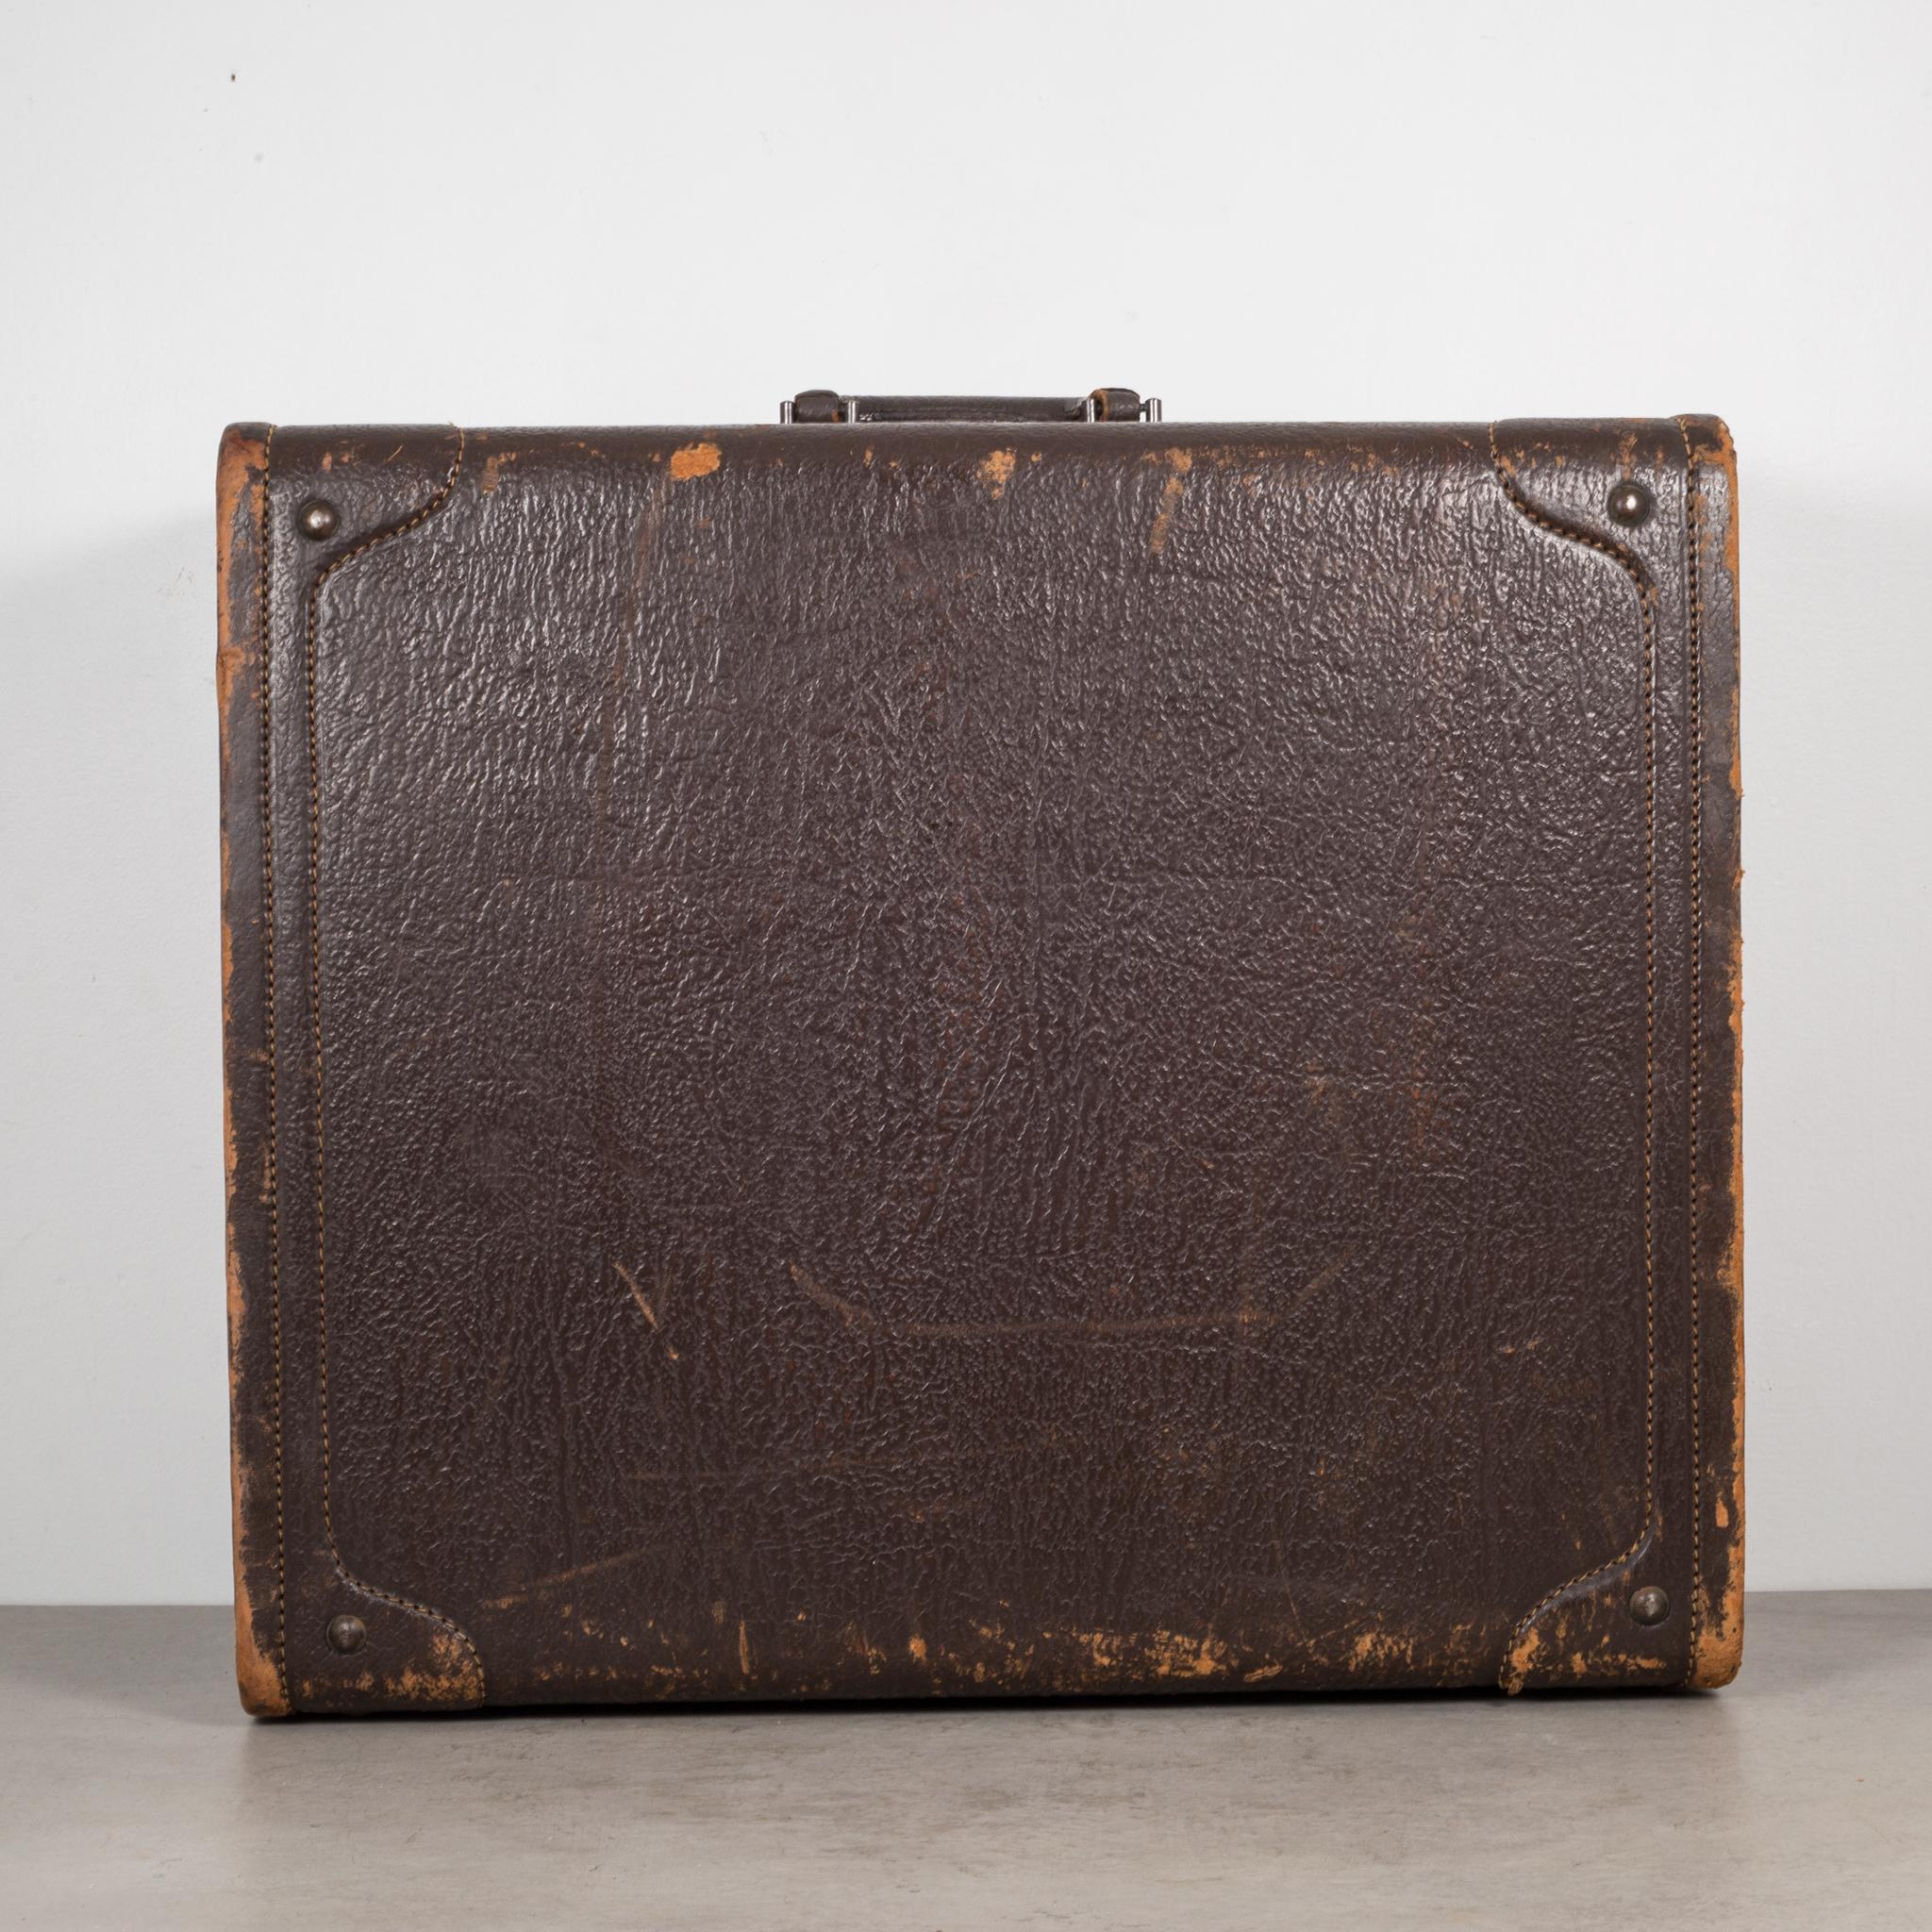 Industrial Monogrammed Leather Luggage, circa 1940